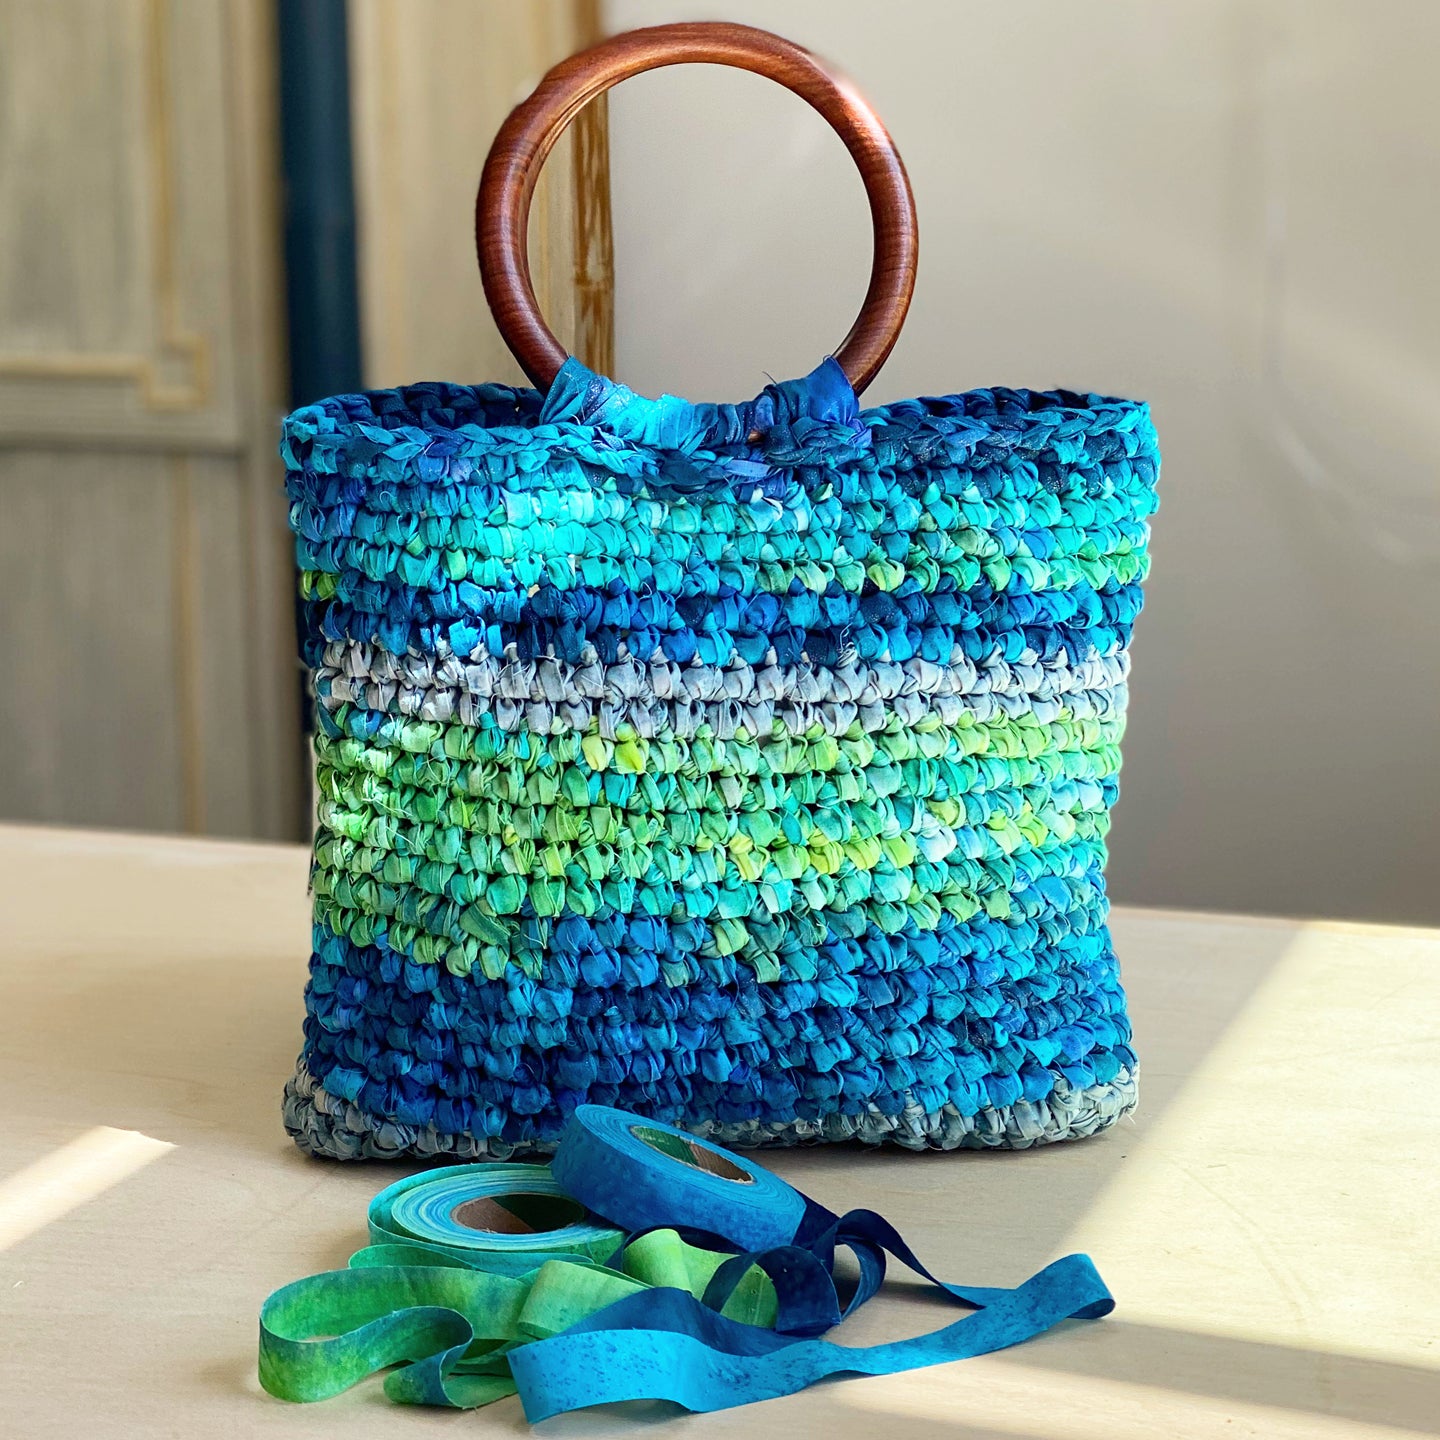 Fabric Tote Bag - Large Carrier | Akos Creative